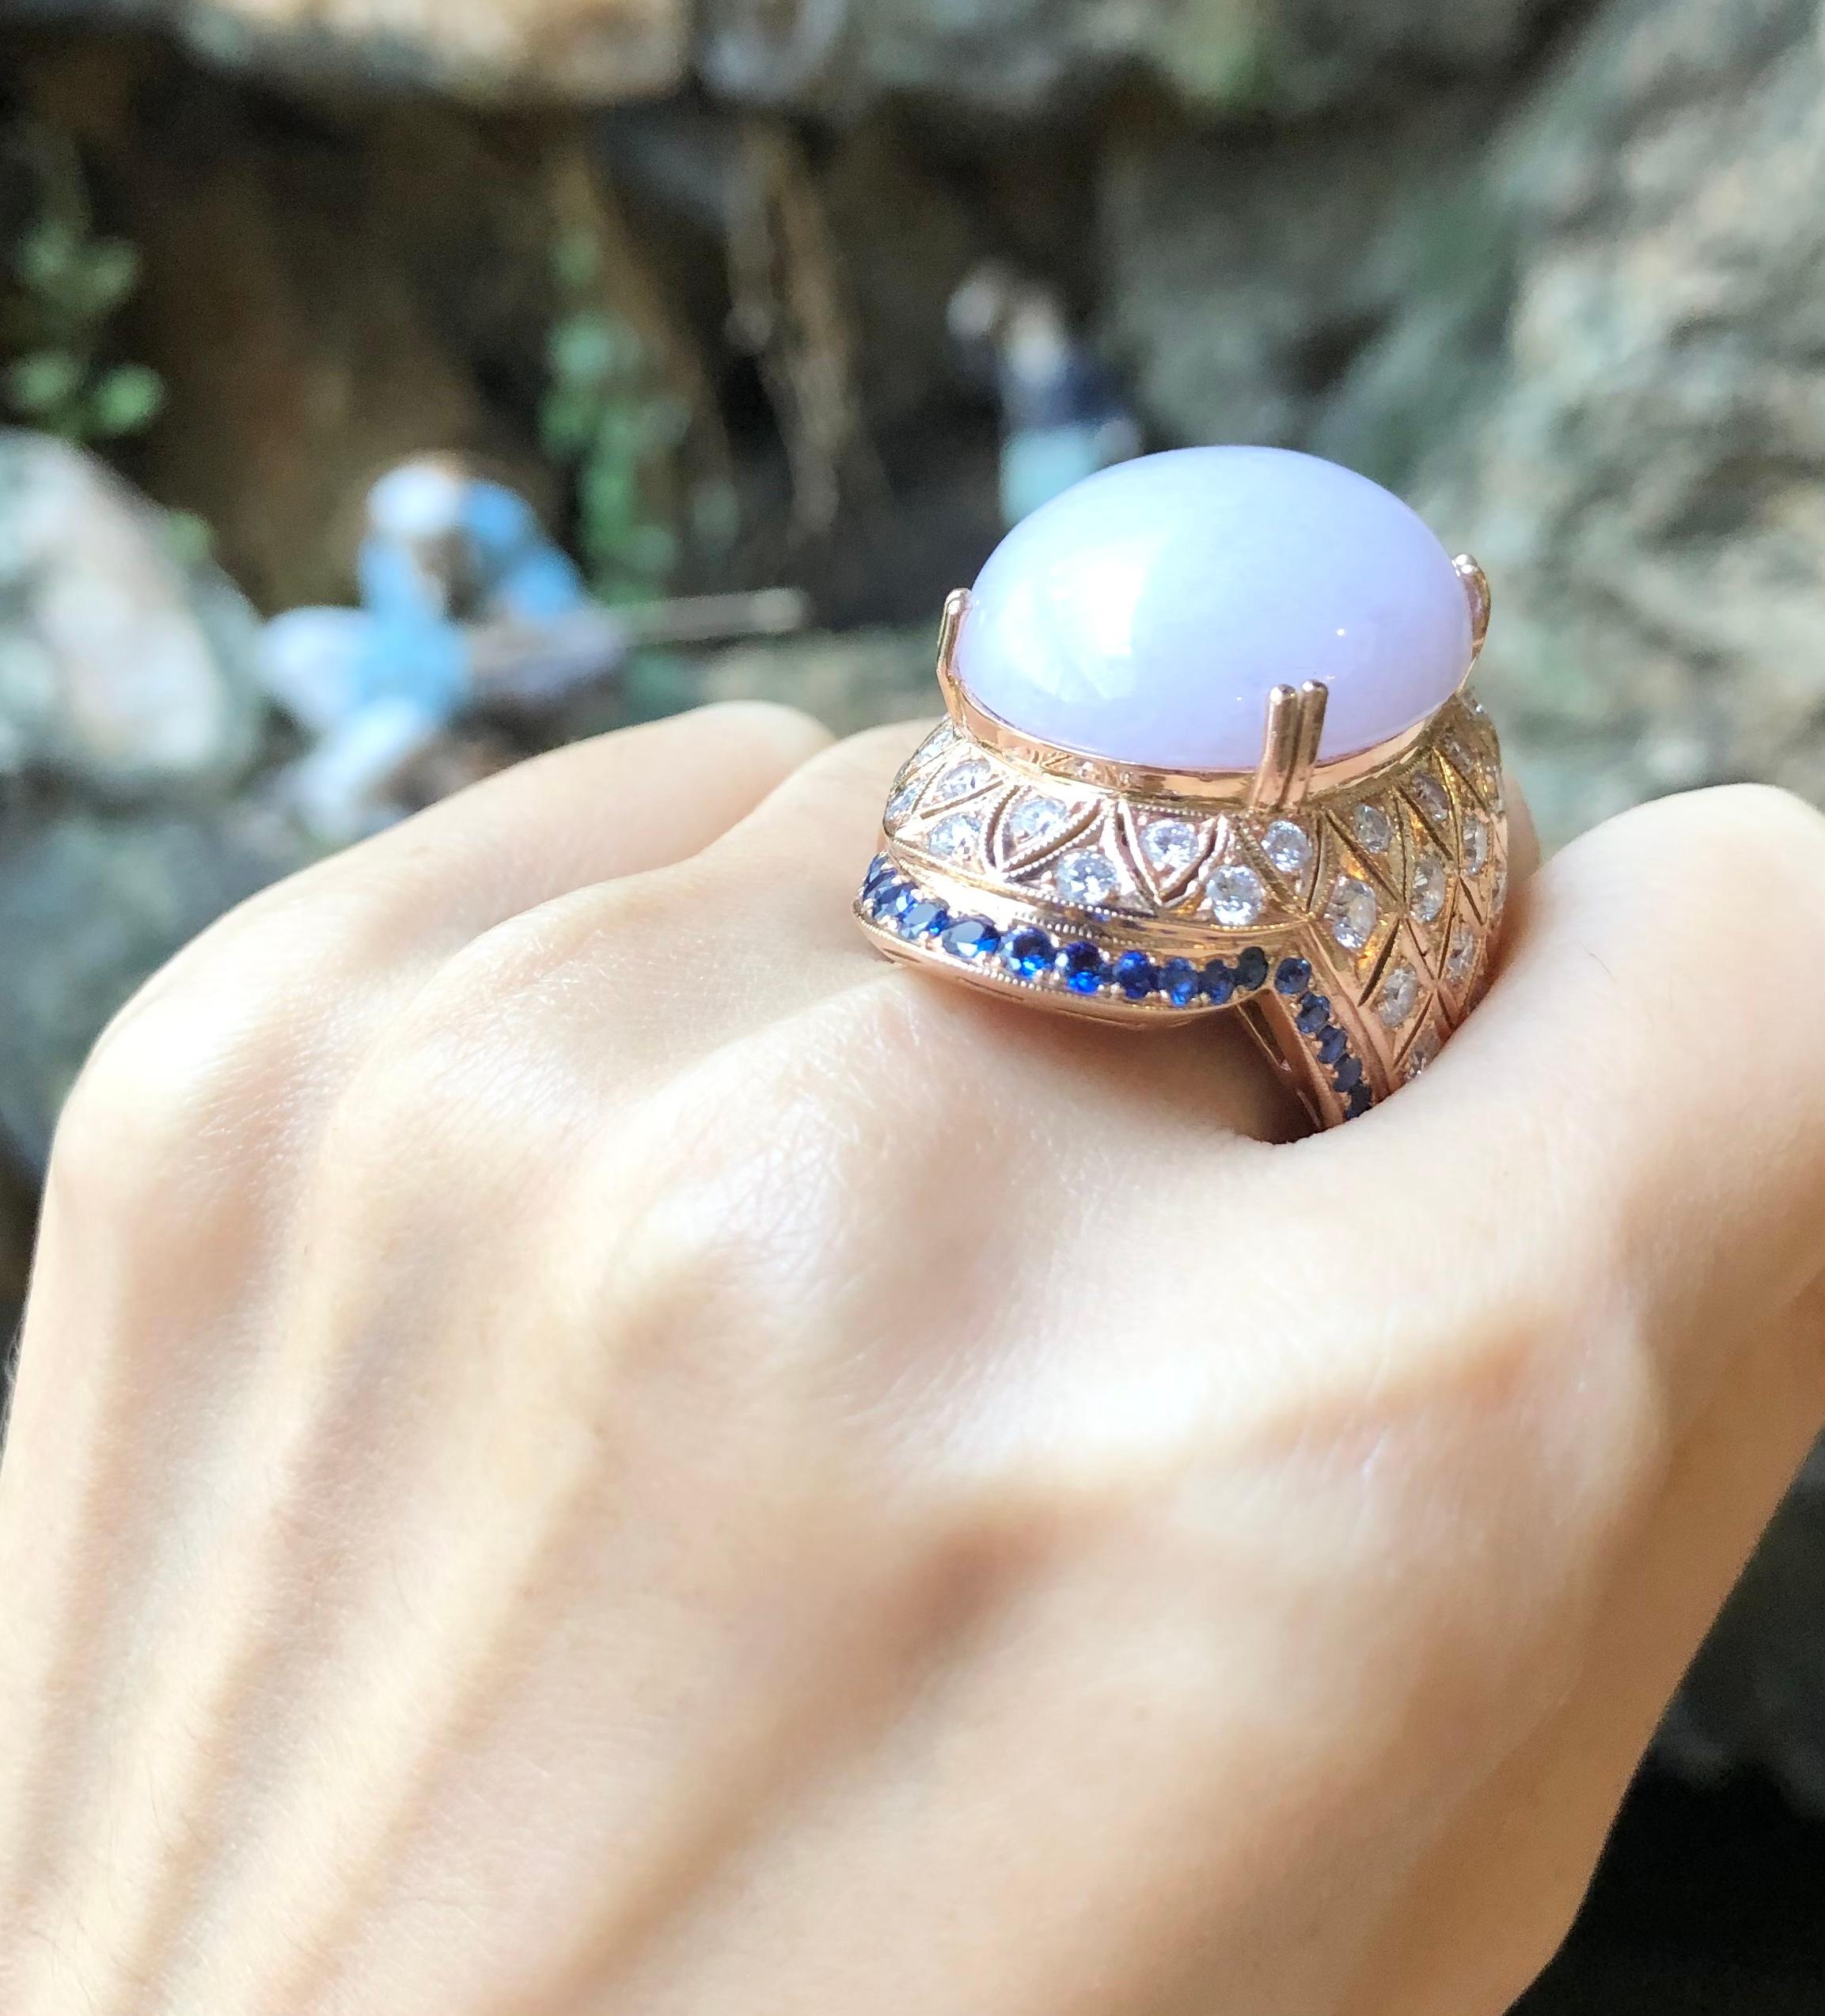 Lavender Jade 45.65 carats with Diamond 1.75 carats and Blue Sapphire 1.10 carats Ring set 18 Karat Rose Gold Settings

Width:  2.5 cm 
Length: 4.1 cm
Ring Size: 58
Total Weight: 34.46grams

